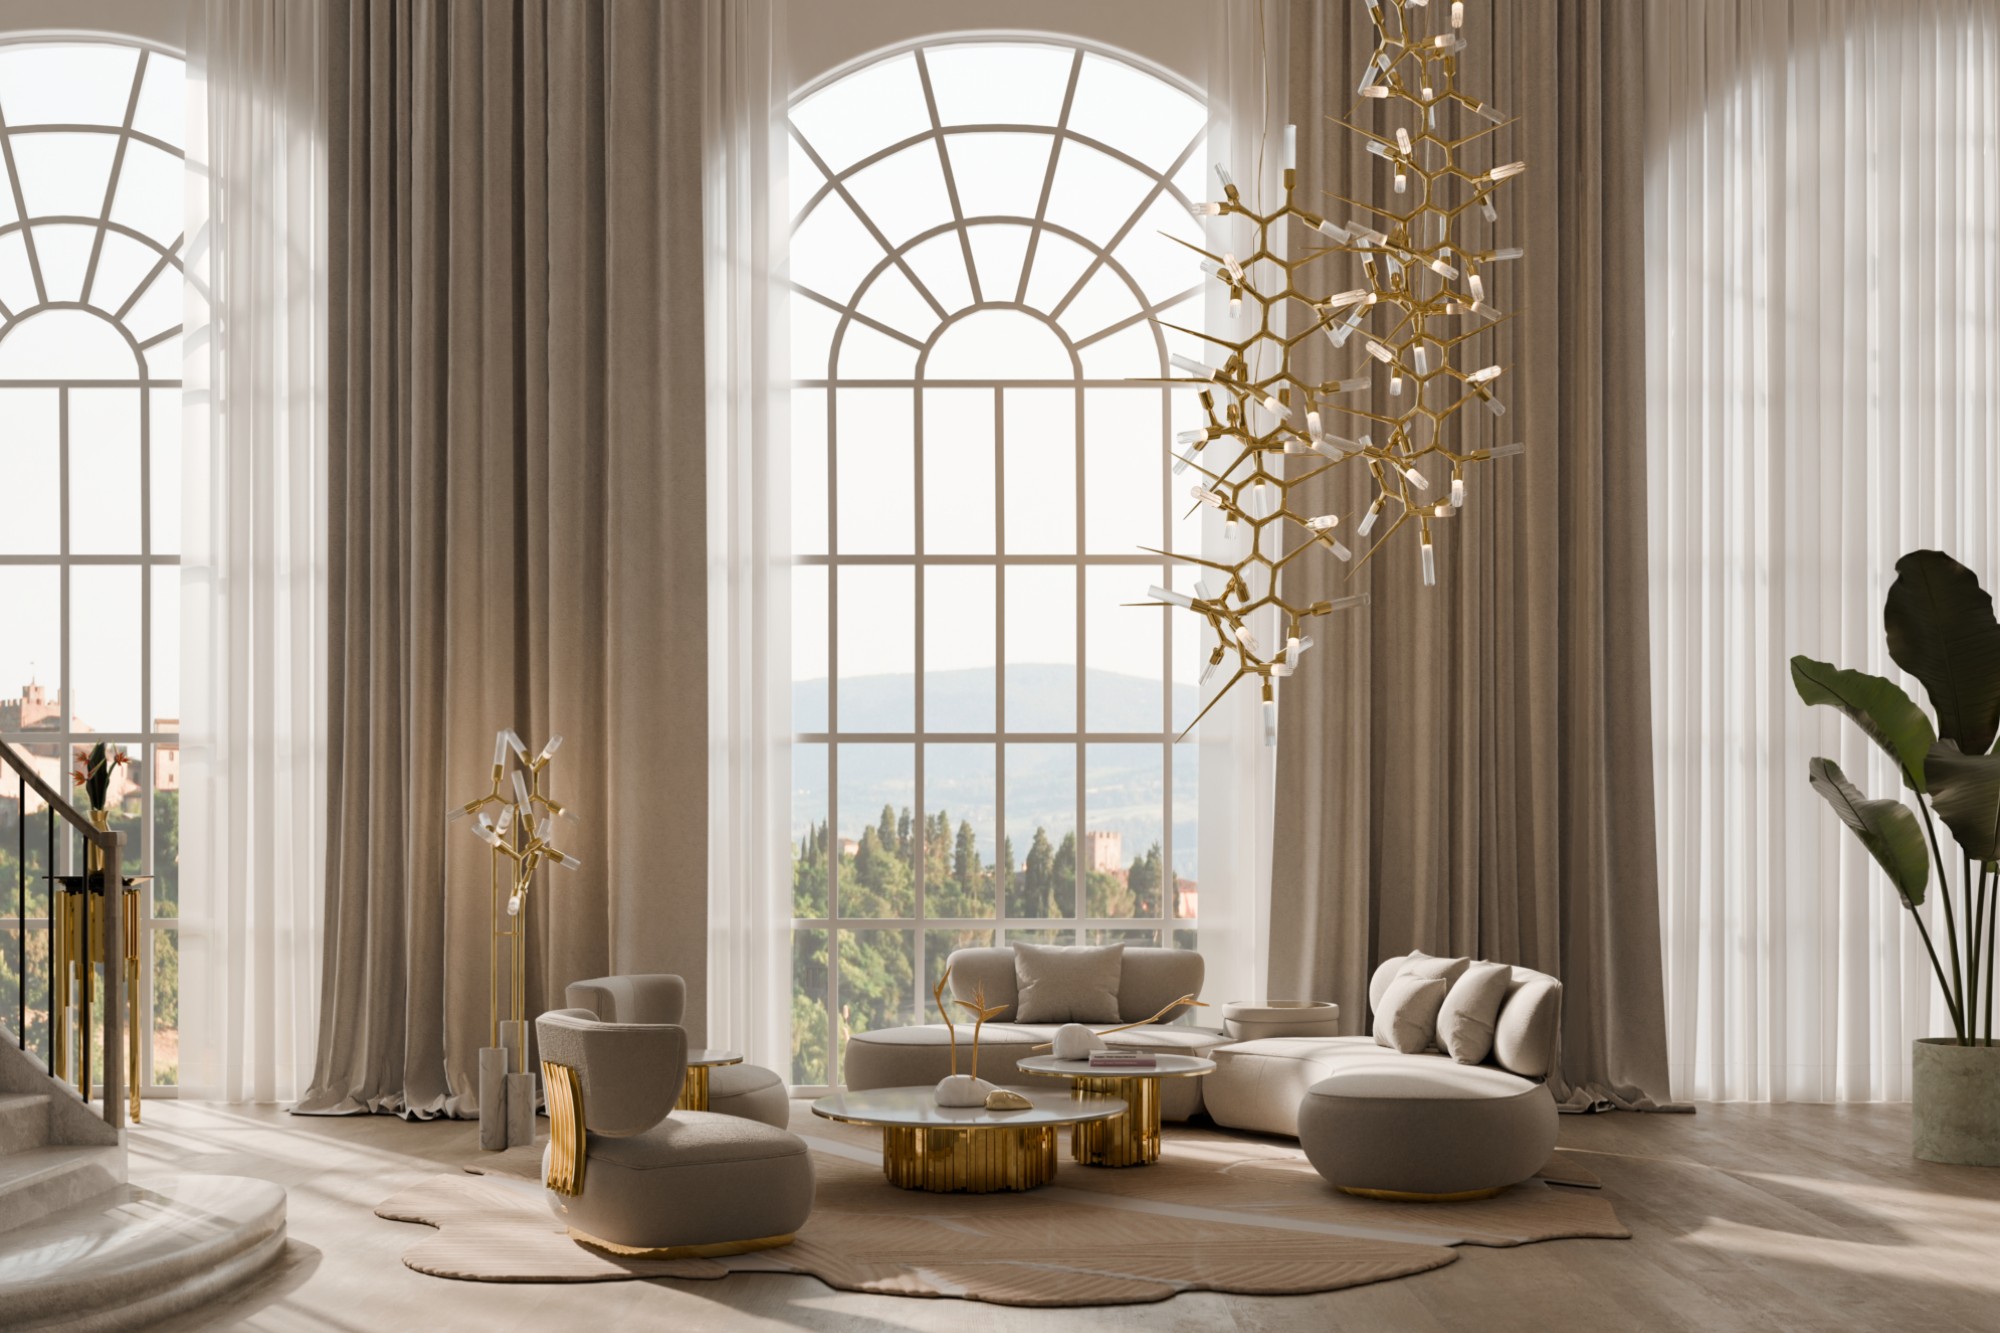 LUXXU introduces furniture collection